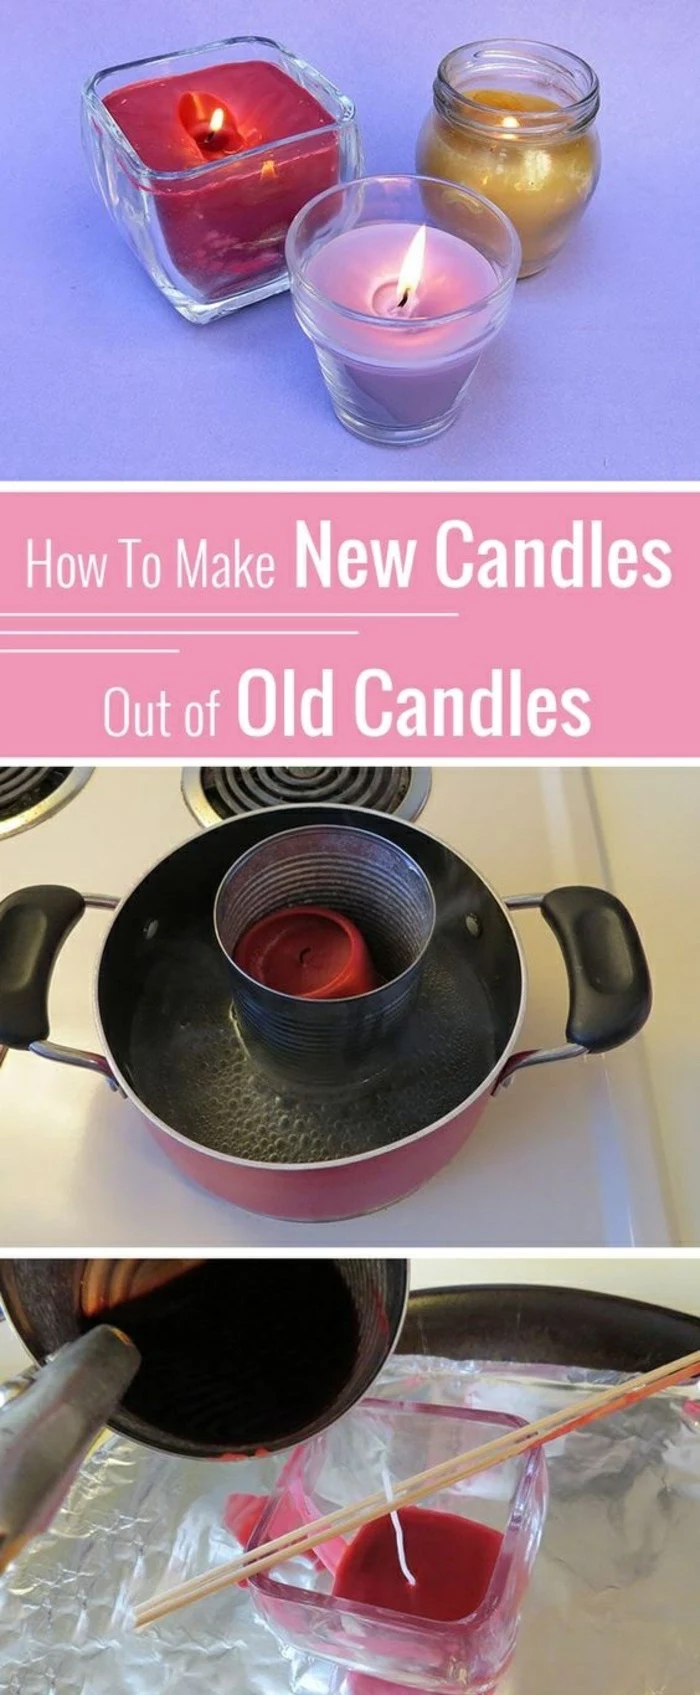 how to make new candles, out of old candles, diy tutorial, how to make your own candles, step by step